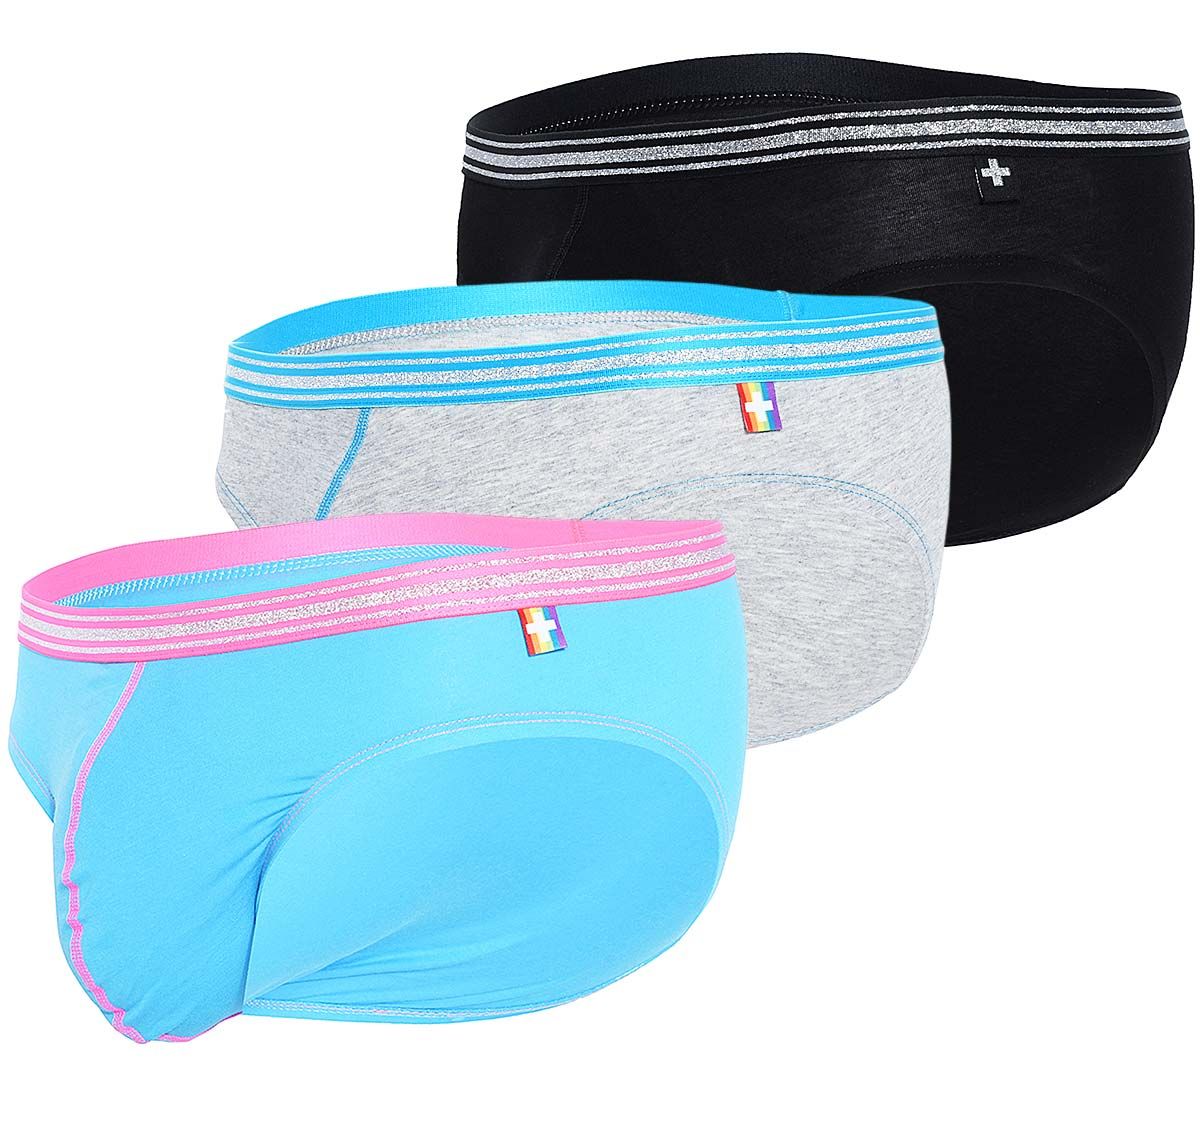 Andrew Christian Pack de 3 Slips BOY BRIEF UNICORN 3-PACK w/Almost Naked 91440, negro/azul/gris